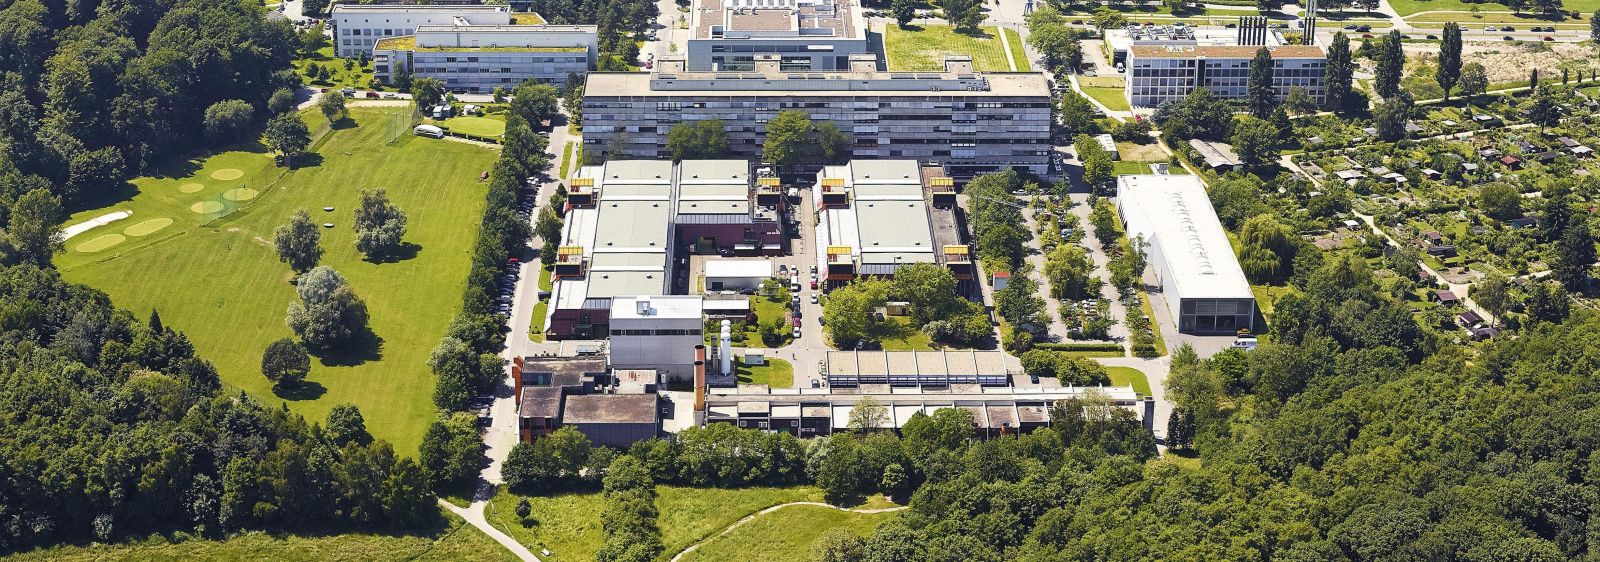 The Lichtwiese campus of the TU Darmstadt in the south of the city in an aerial photograph